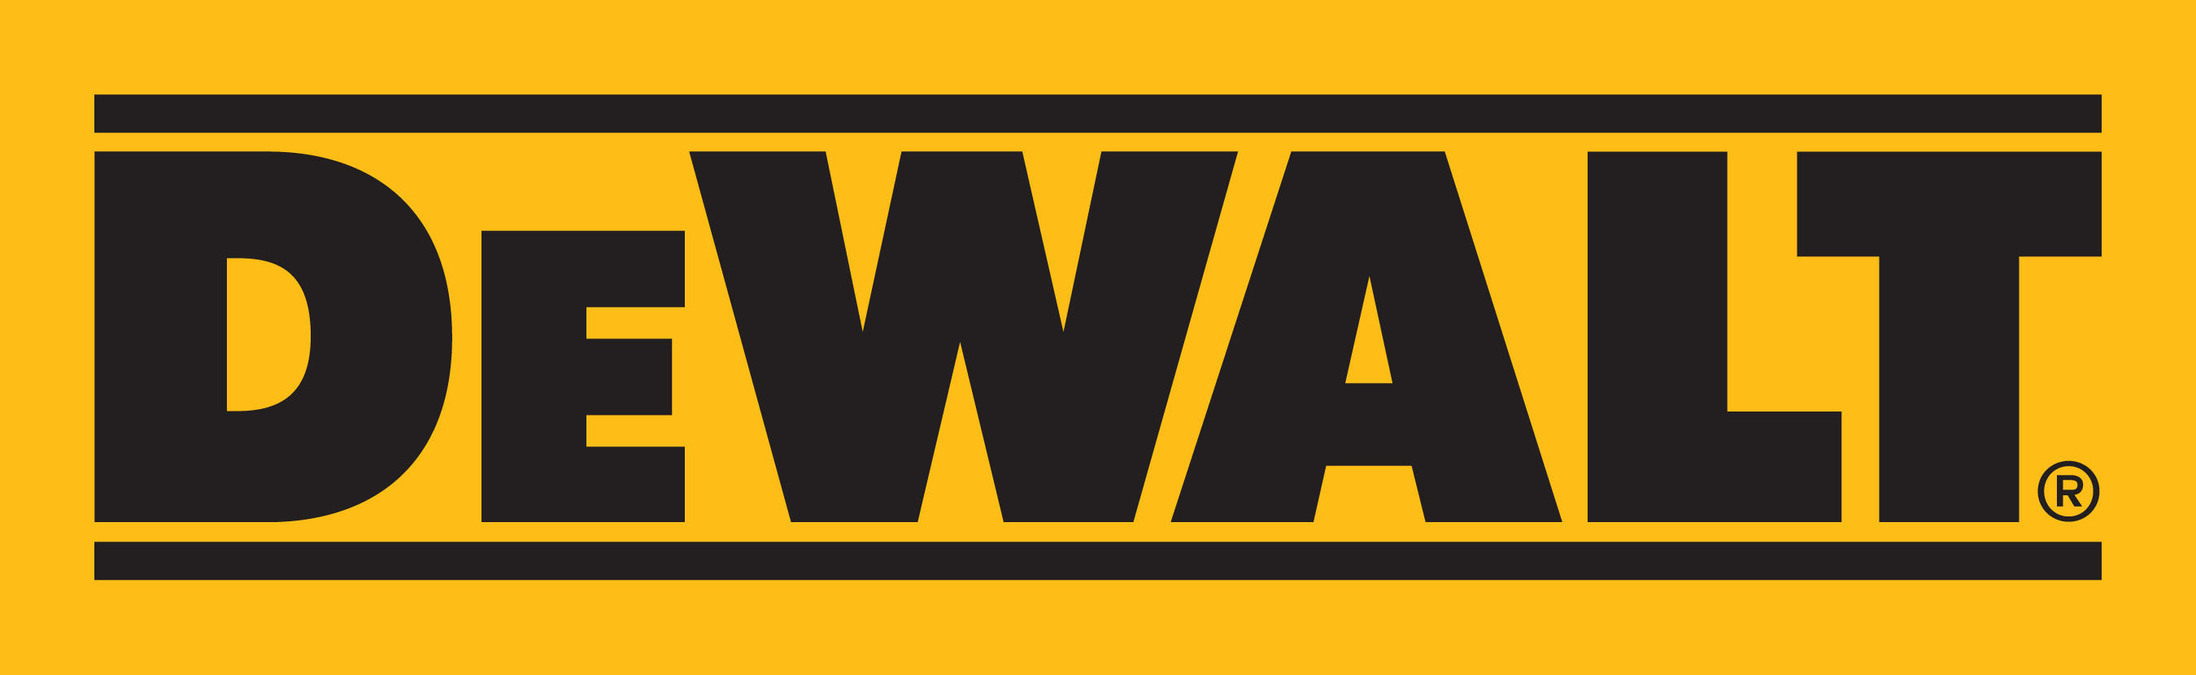 Stanley Black & Decker on X: DEWALT introduces its first-ever  biodegradable chainsaw oil that is produced in the USA. A USDA Certified  Biobased Product, it's designed to maximize bar and chain life